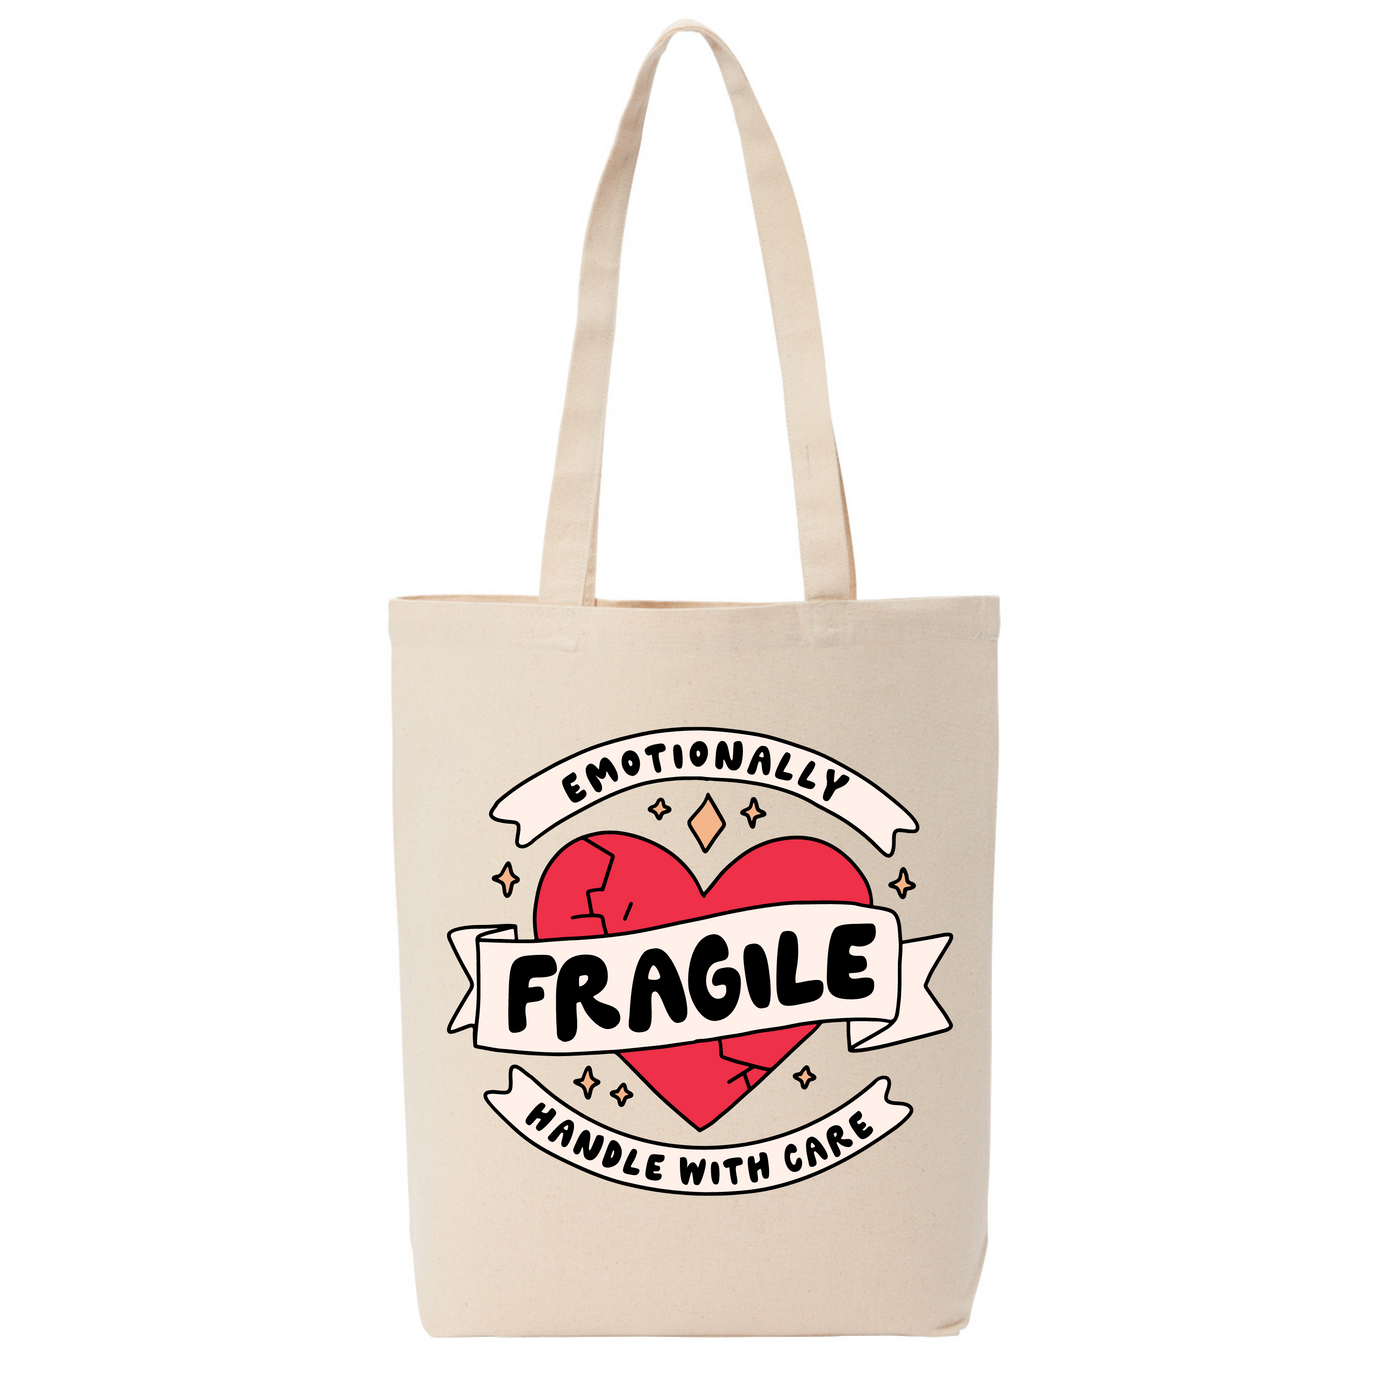 "Handle With Care" Tote Bag